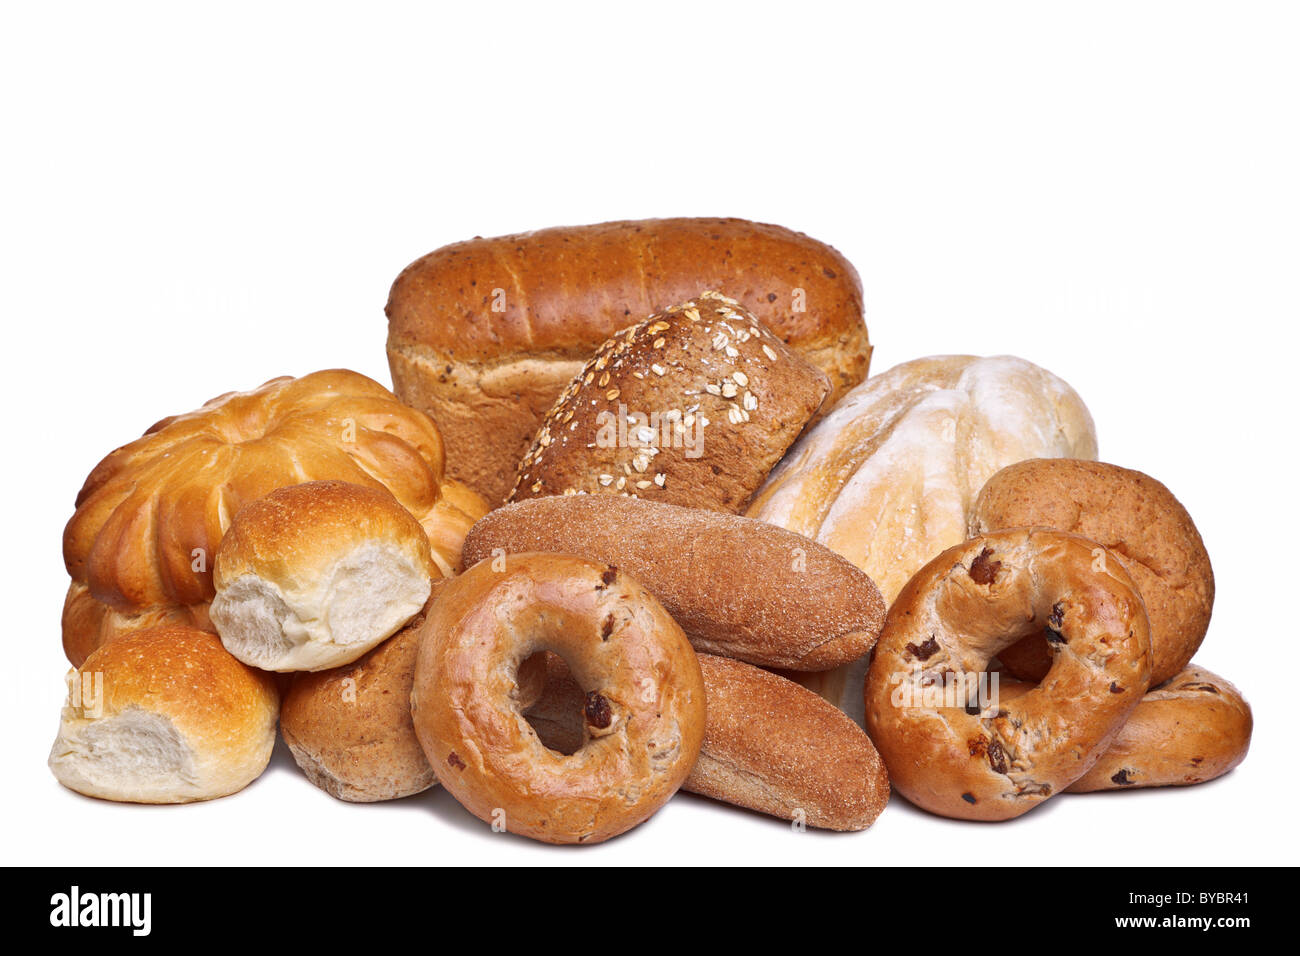 Photo of various types of bread isolated on a white background. Stock Photo